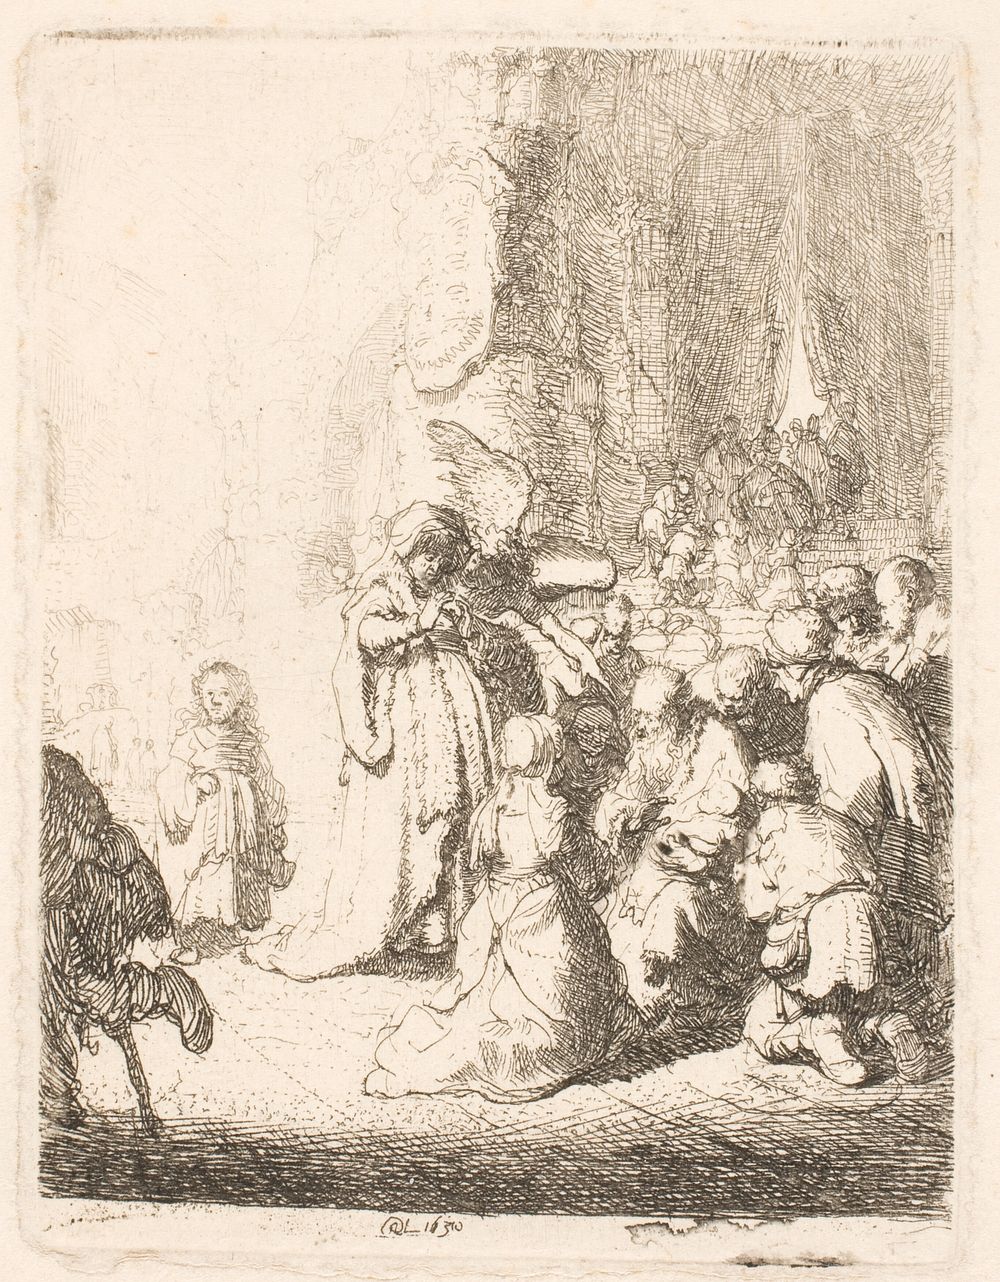 The Presentation in the Temple (with the angel).Small plate by Rembrandt van Rijn